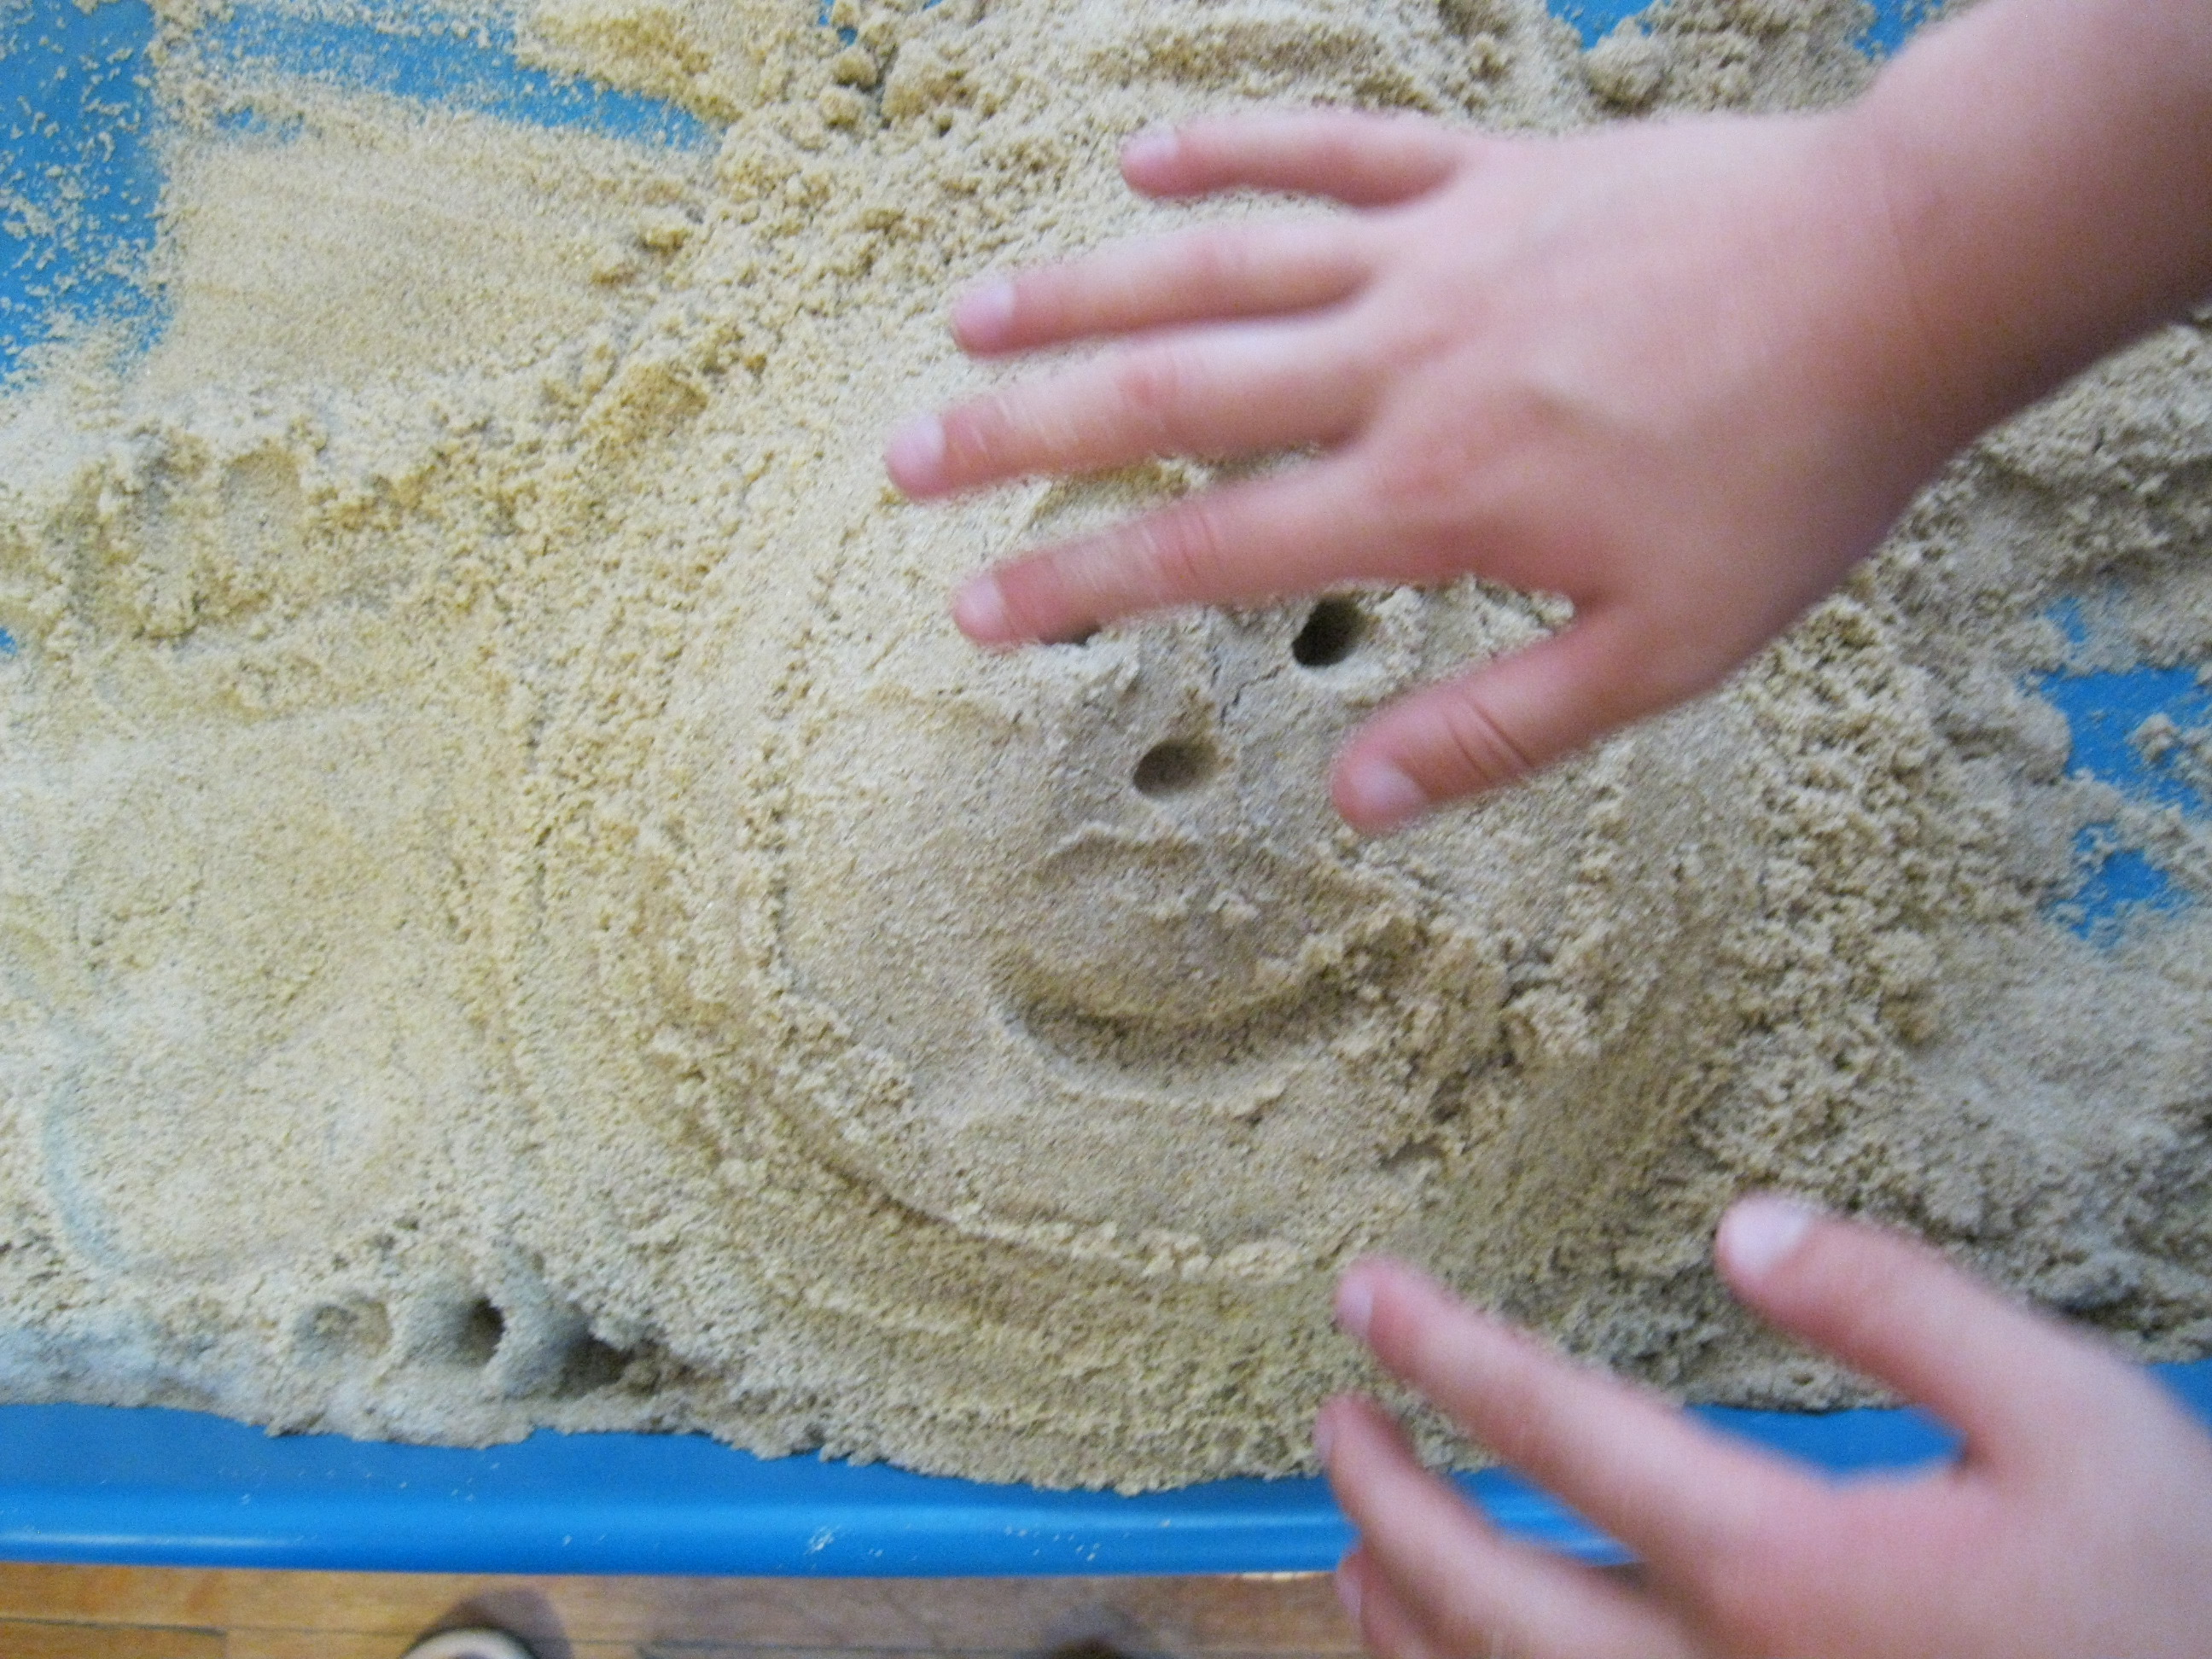 image of child's hand in sand tray